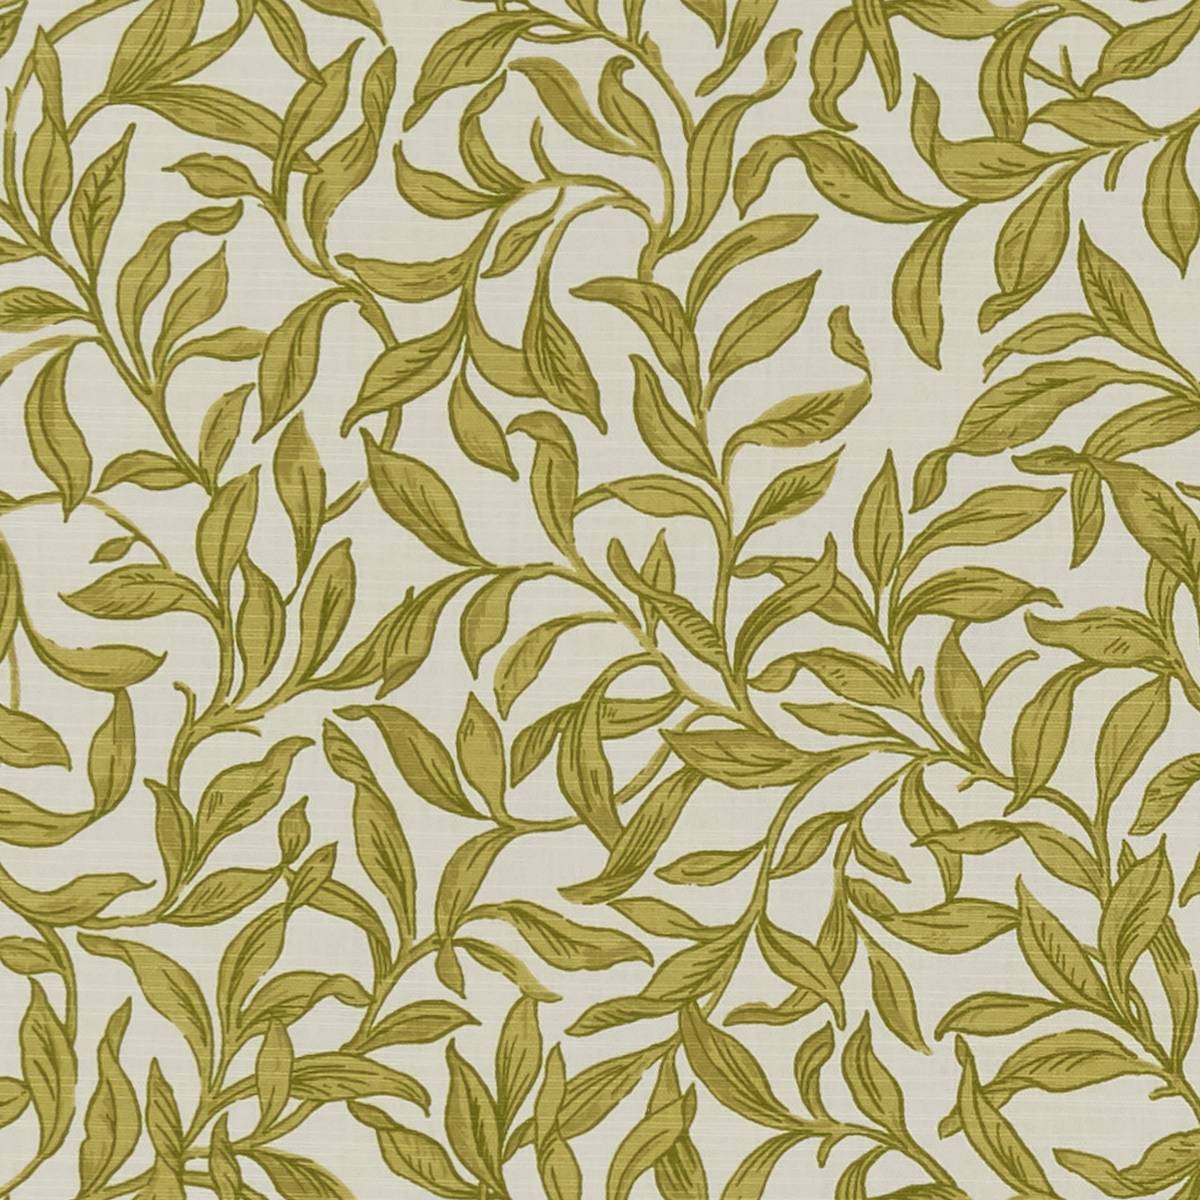 Entwistle Chartreuse Fabric by Studio G